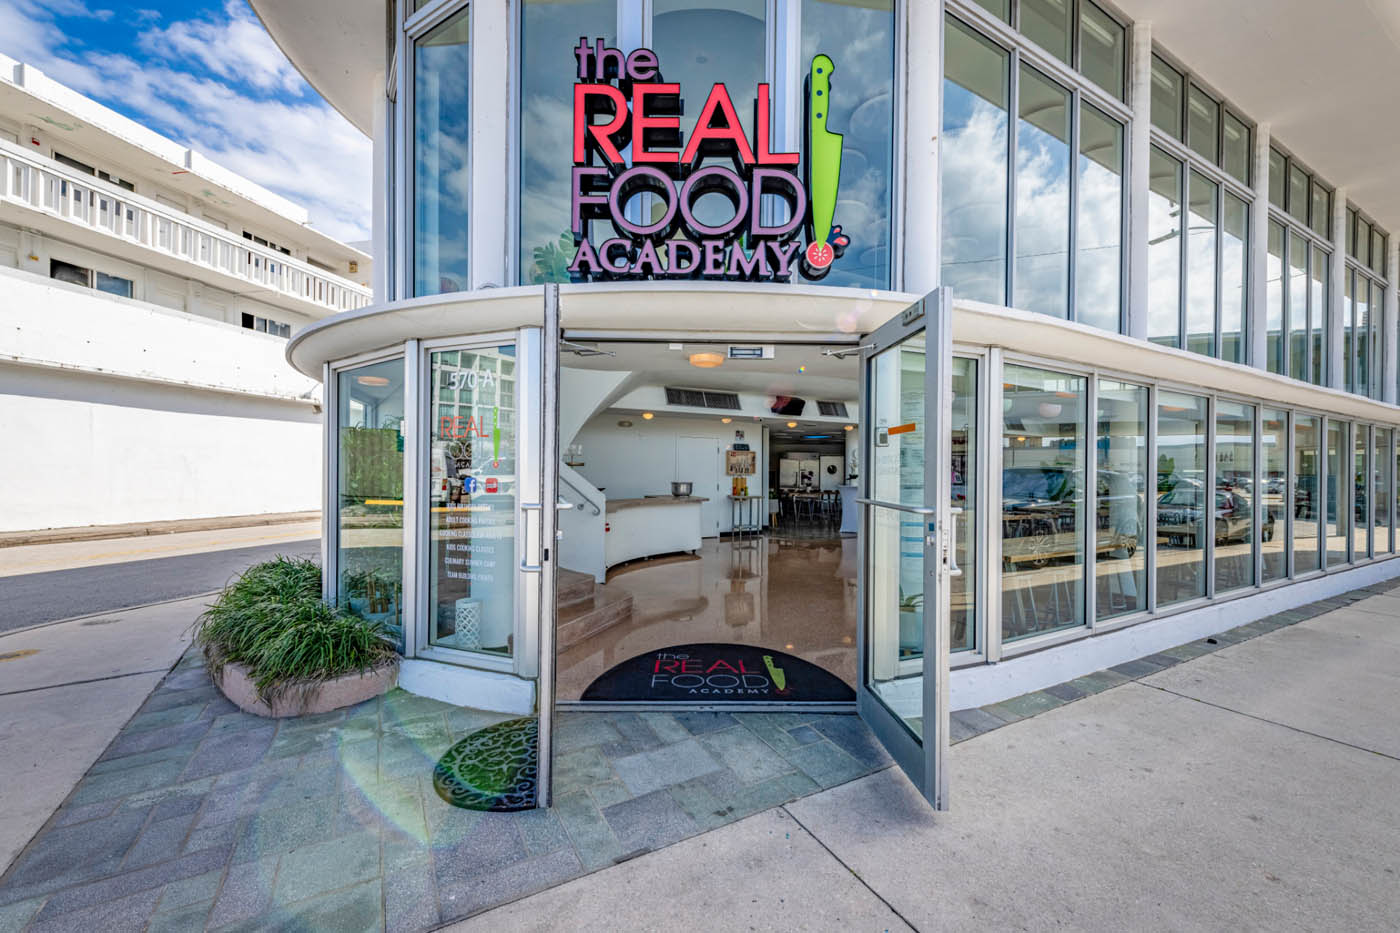 The Real Food Academy Miami - Contact. The Real Food Academy Miami, FL